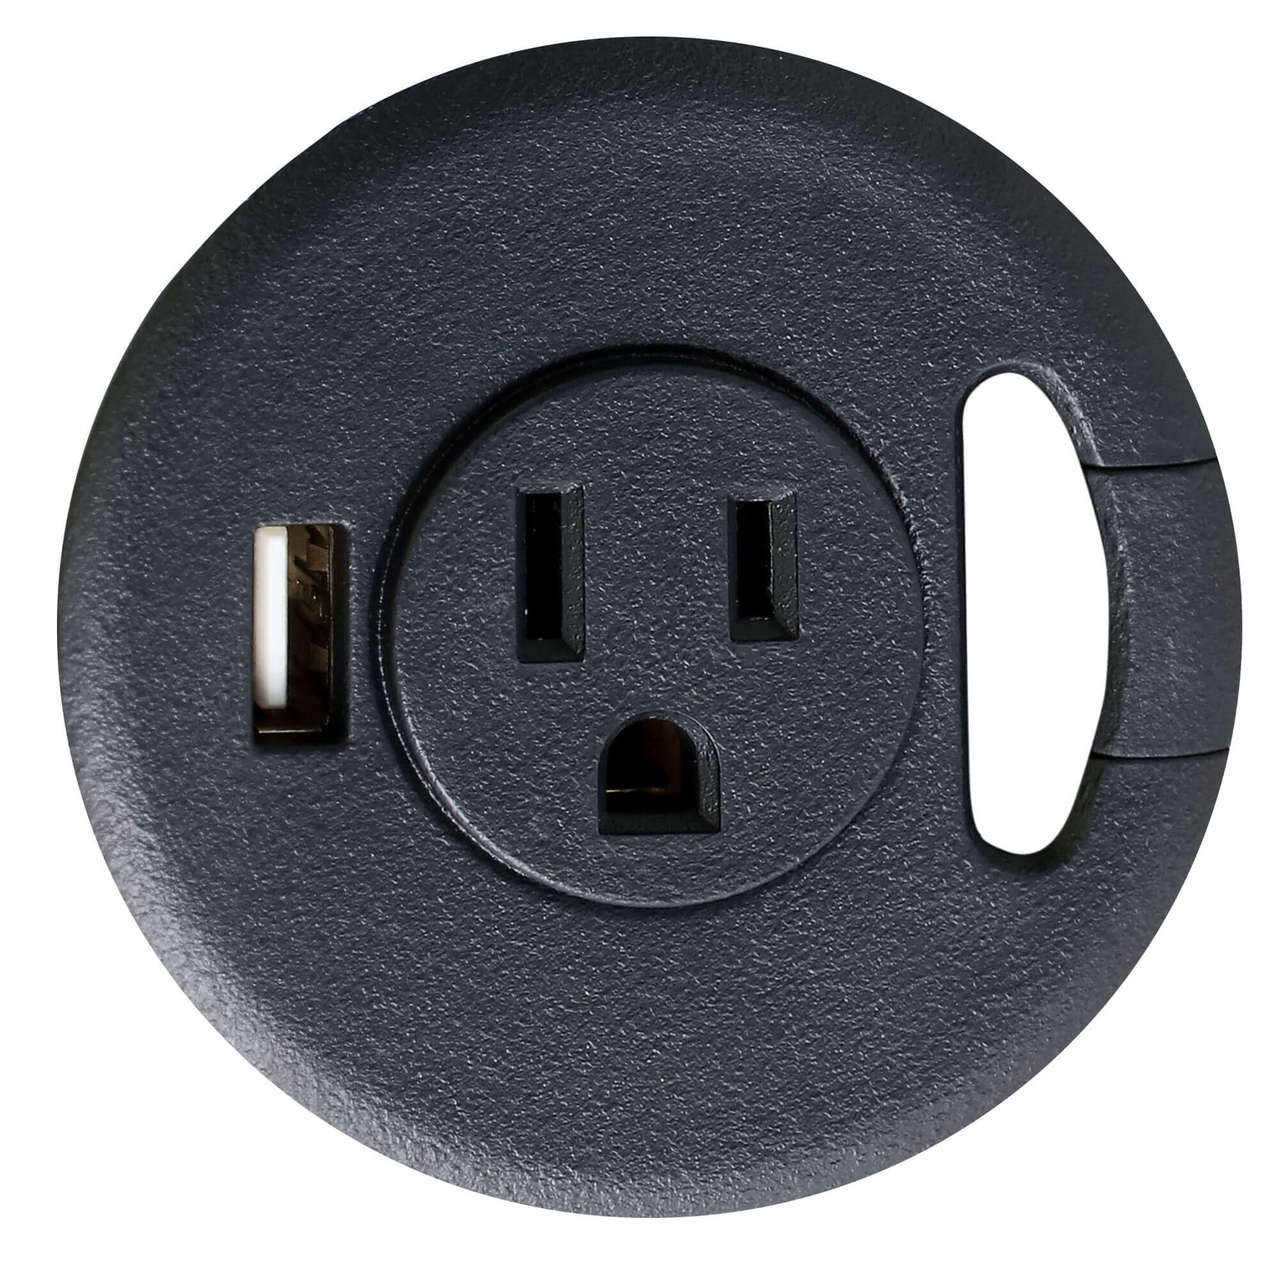 Table Top Power & USB Grommet Hole Adapter, Black